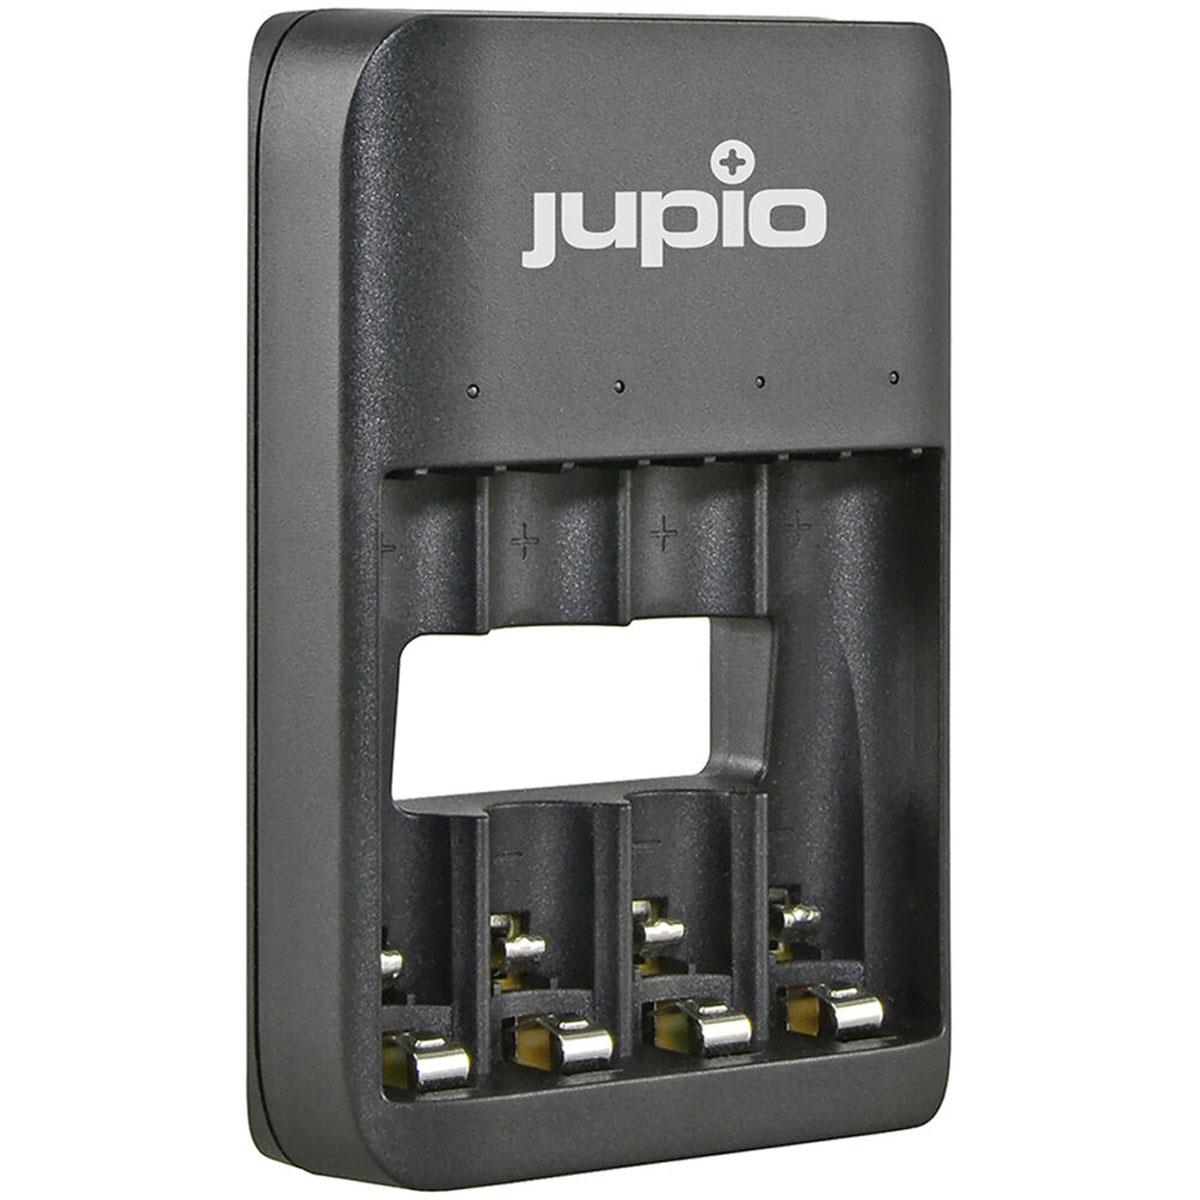 Image of Jupio USB 4-Slot Battery Charger with LED for Rechargeable AA and AAA Batteries